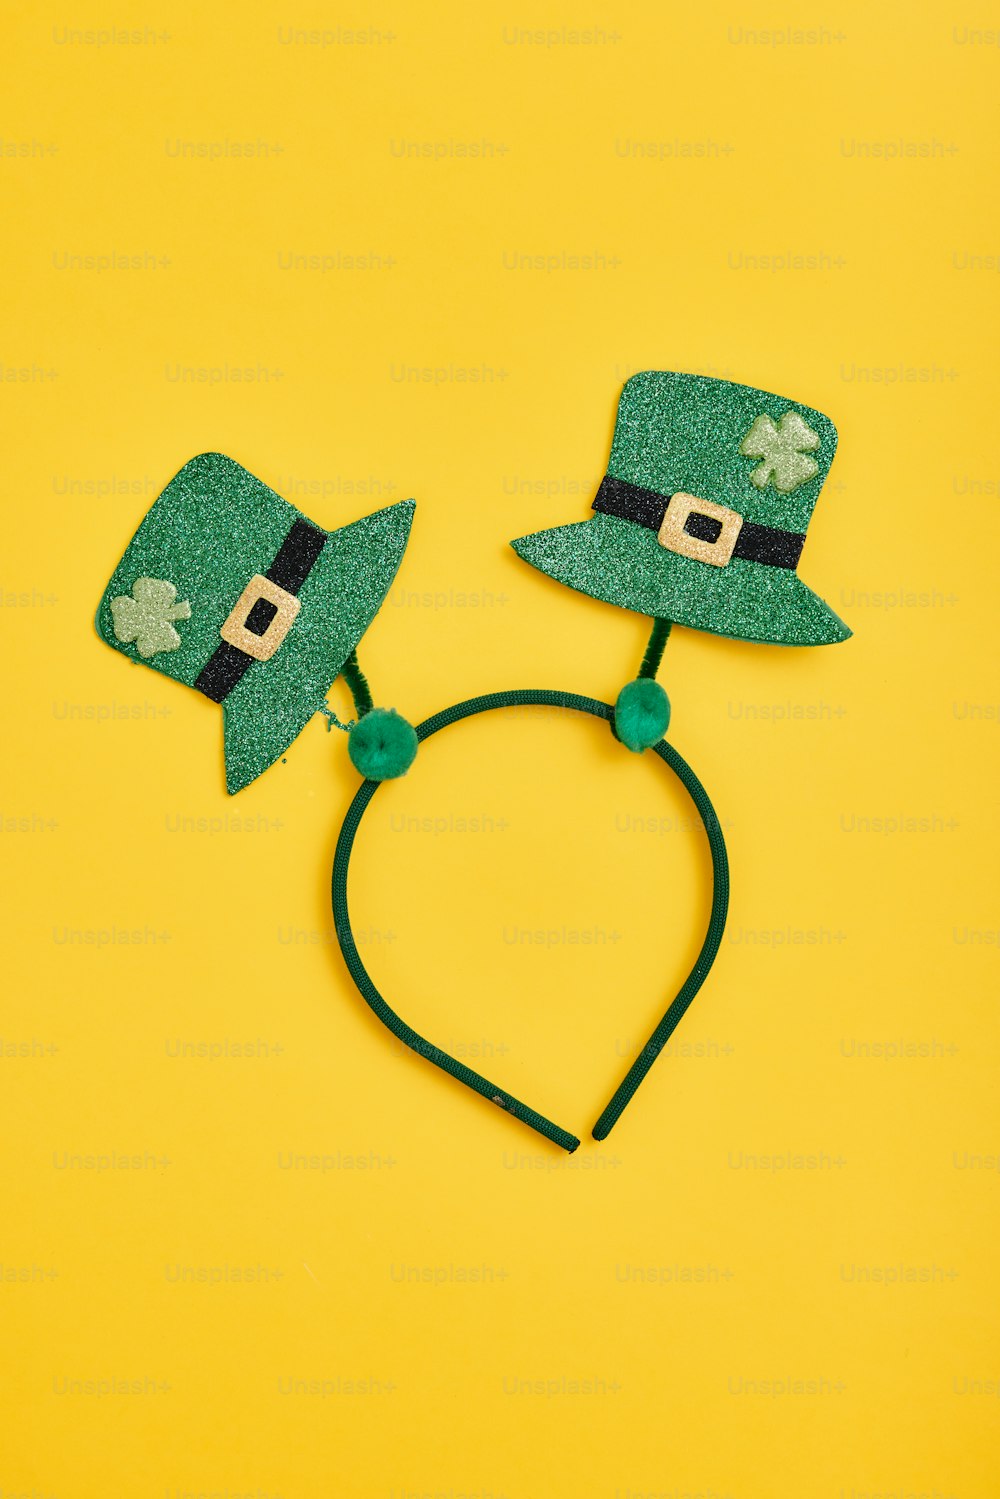 a pair of green hats on a yellow background